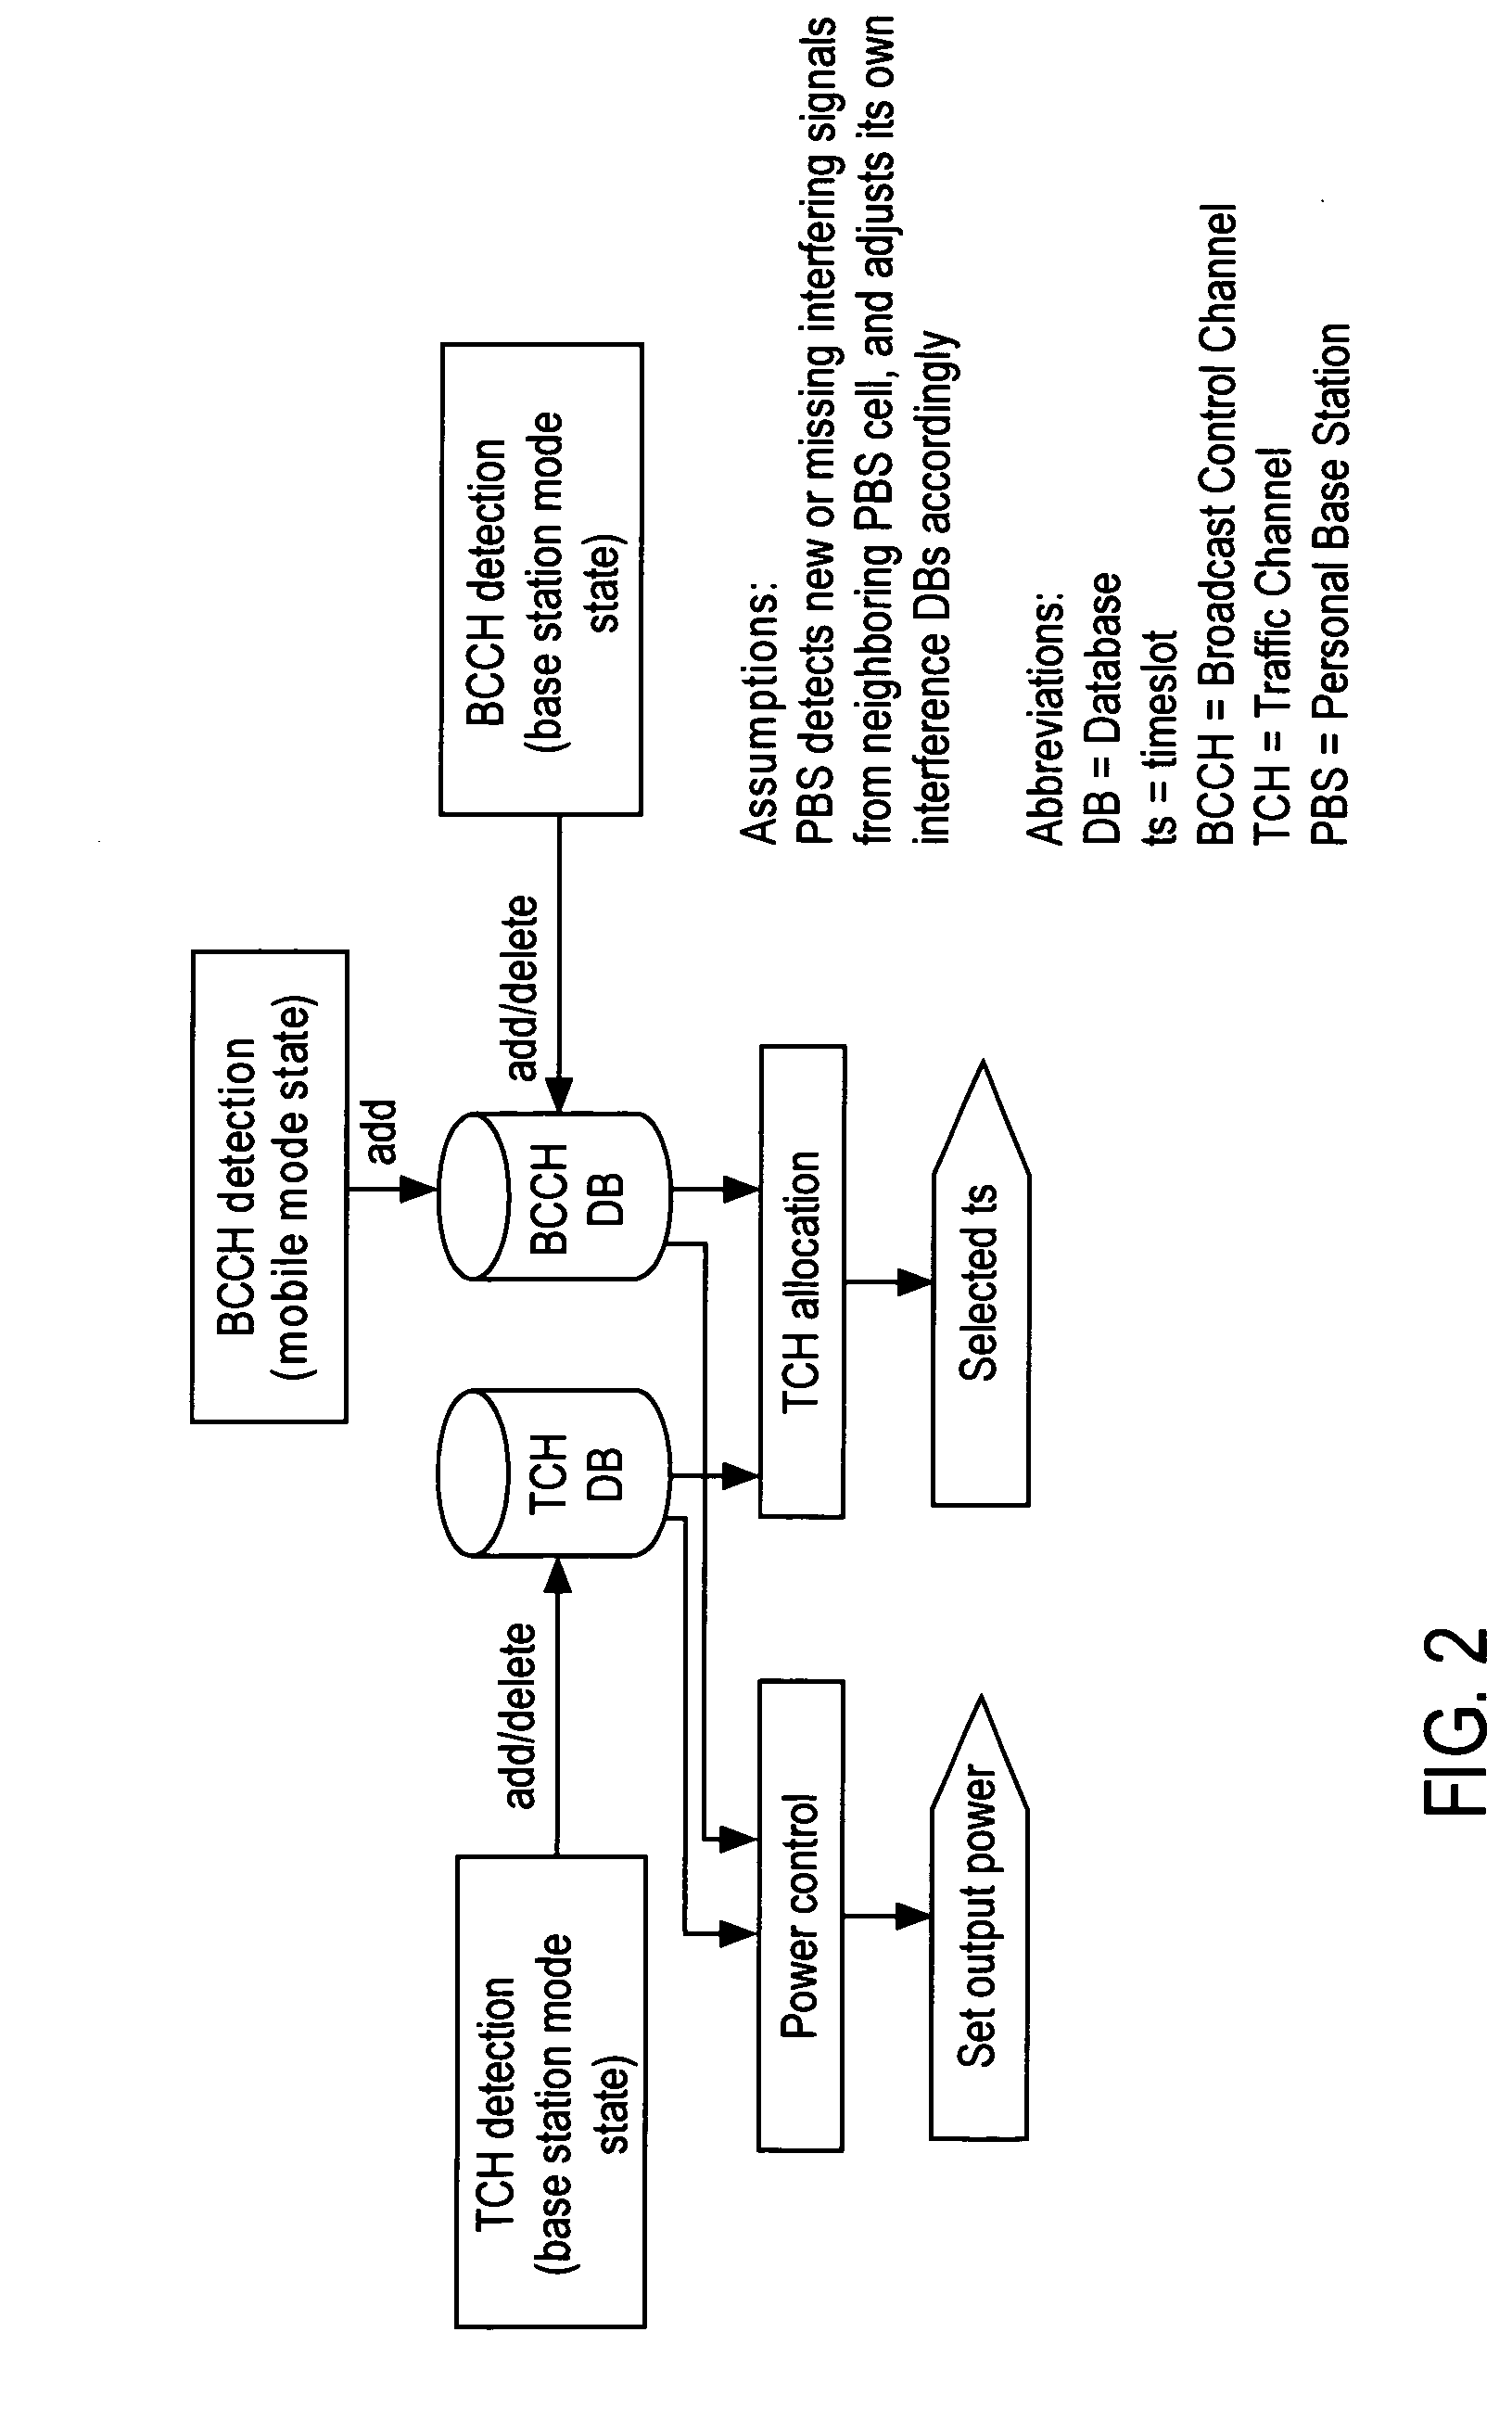 Base station interference control using timeslot resource management